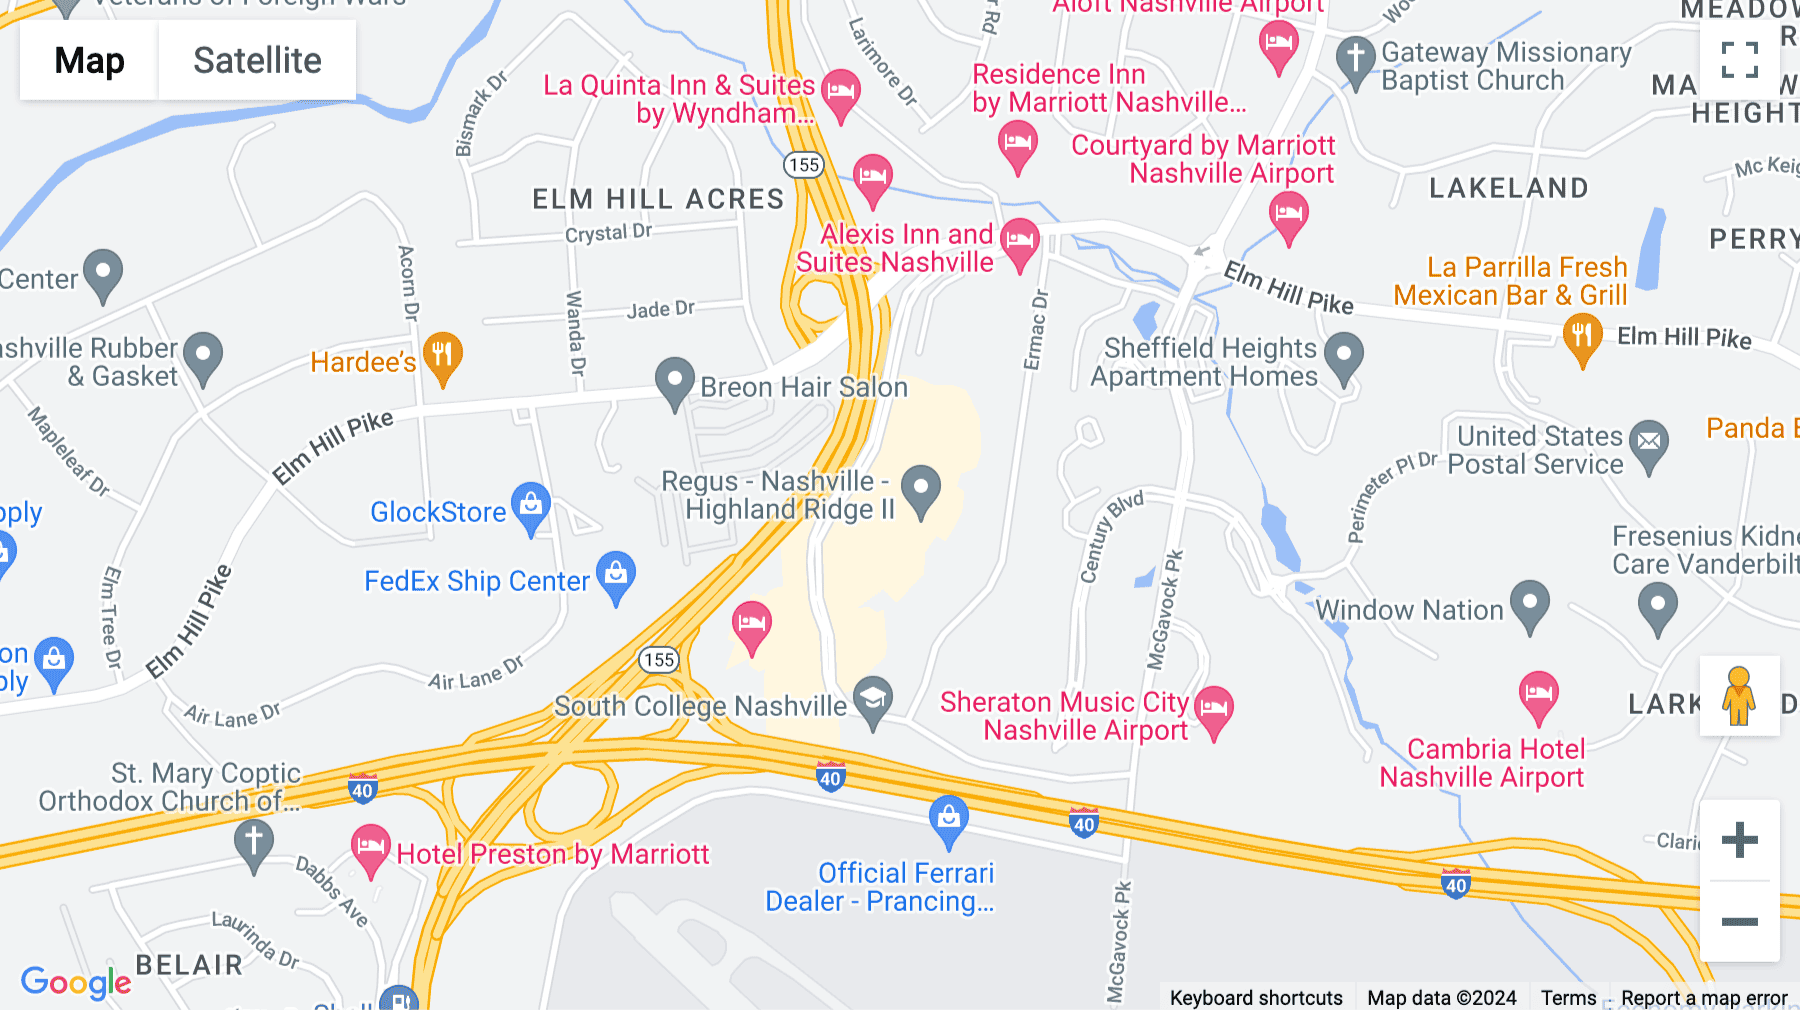 Click for interative map of 555 Marriott Drive, Suite 315, Nashville Tennessee, Nashville